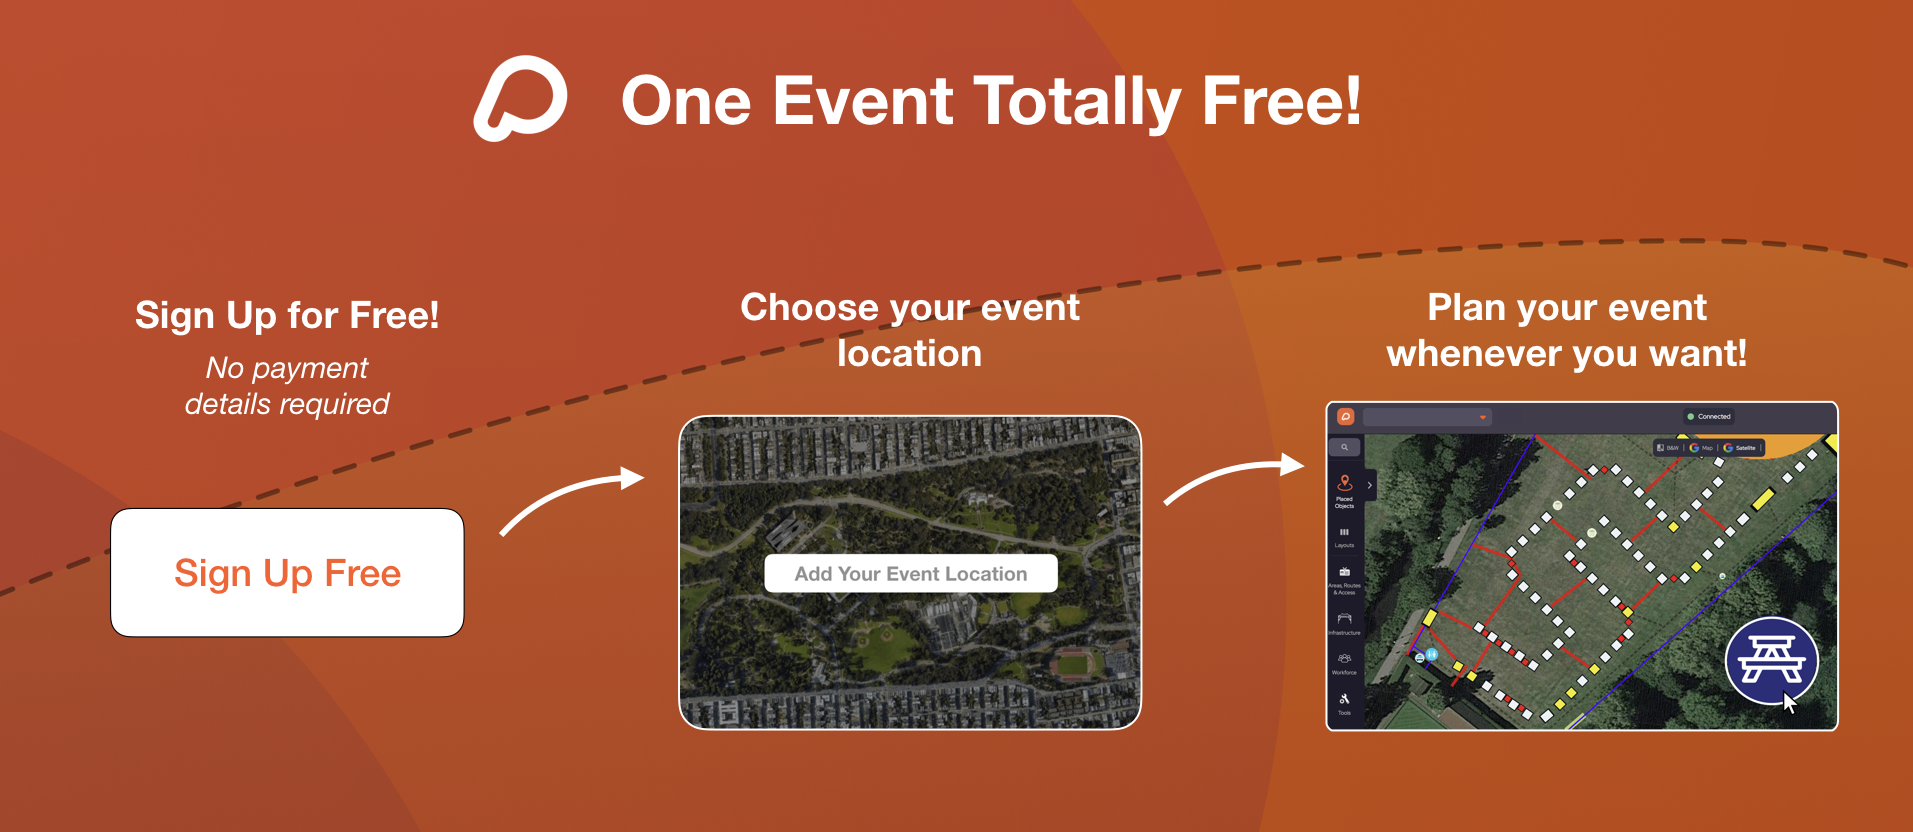 Oneplan Is Now Free For Anyone To Plan An Event Site Event Industry News